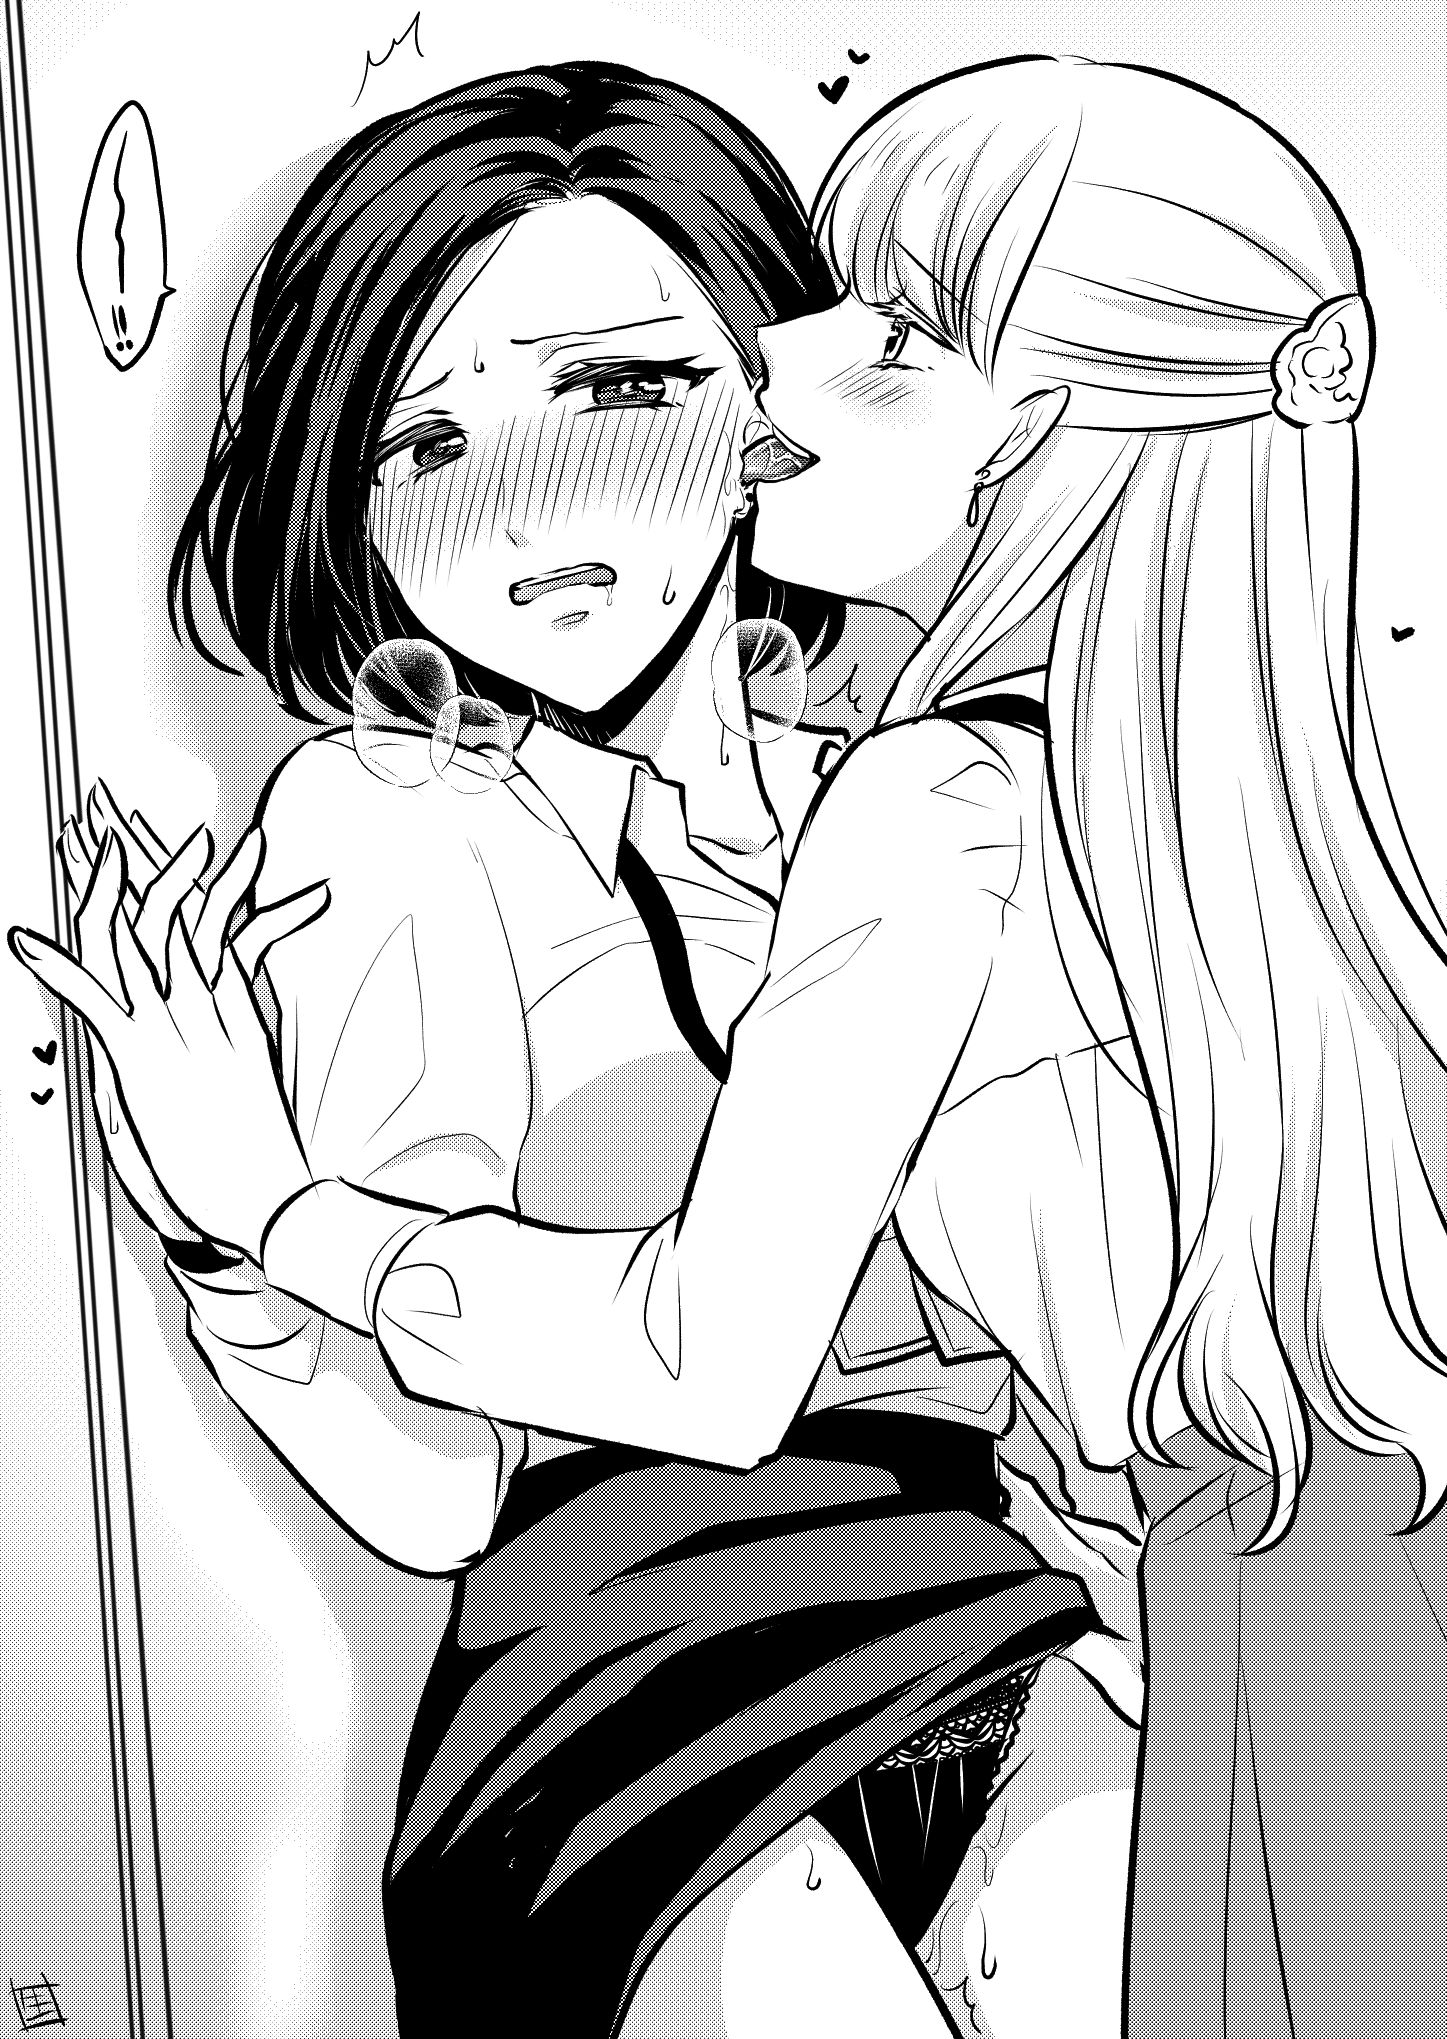 A Yuri Story About a Junior I Couldn't Stand - chapter 2 - #5